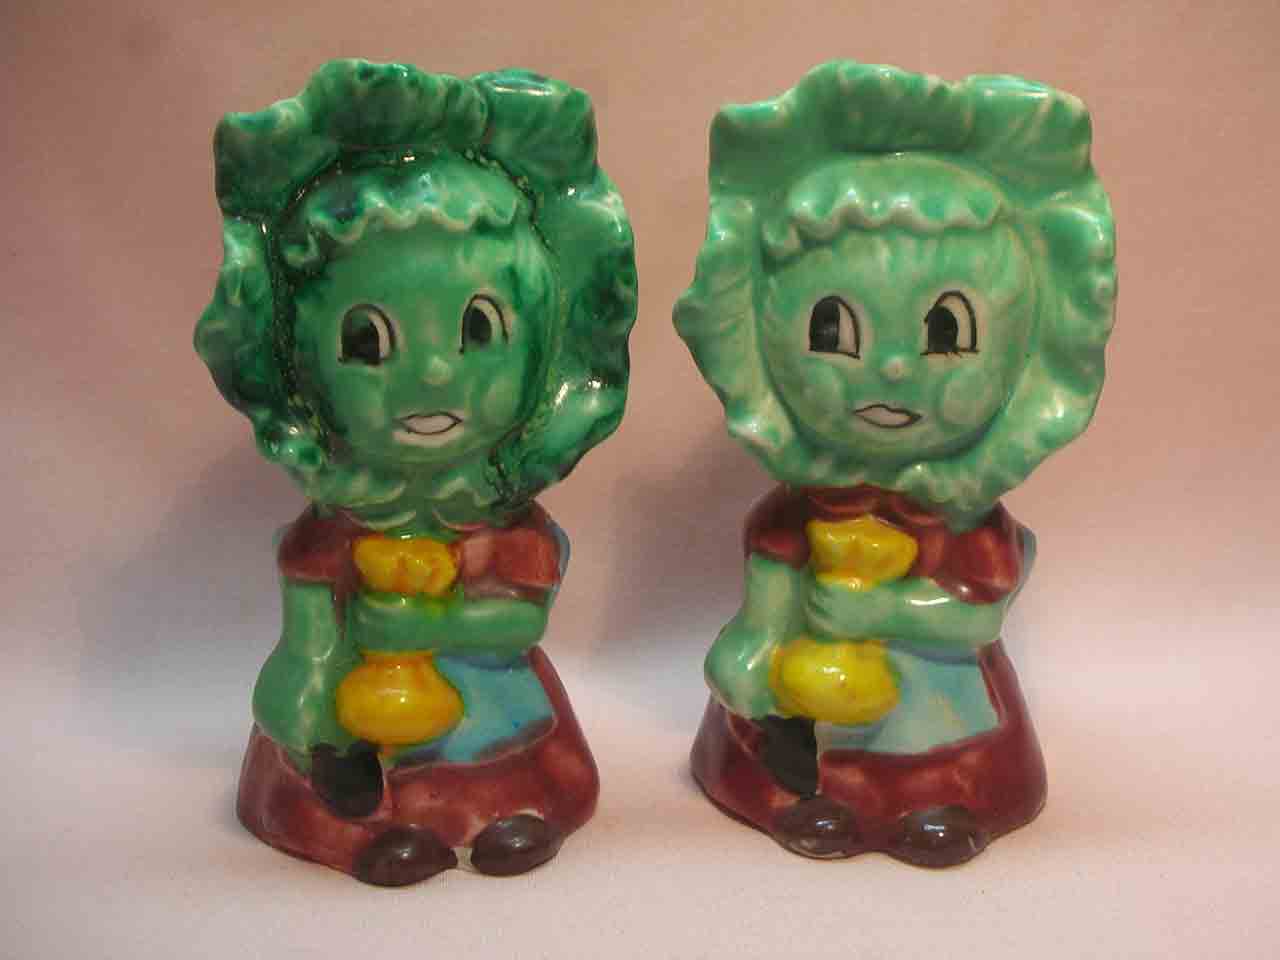 Anthropomorphic vegetable farms salt and pepper shakers called "Country Cousins" - Cabbages